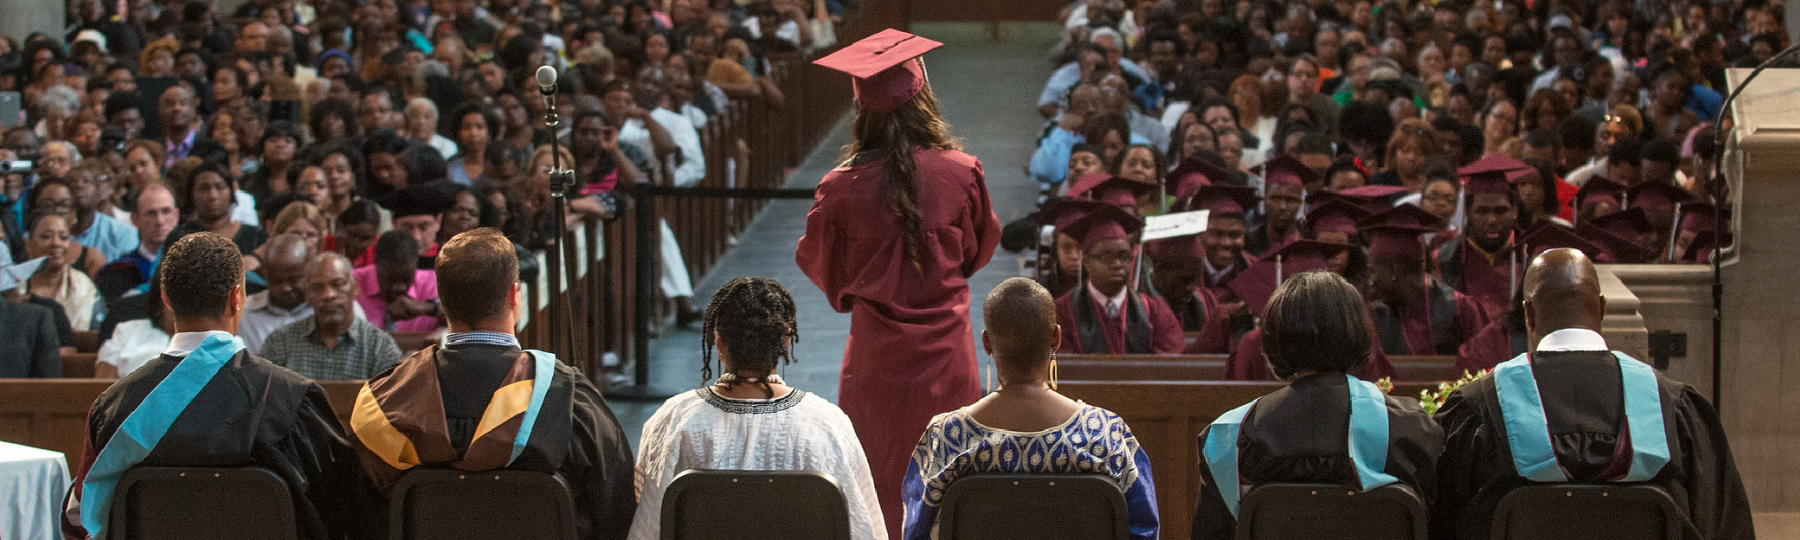 A high school senior gives her graduation speech at the ceremony